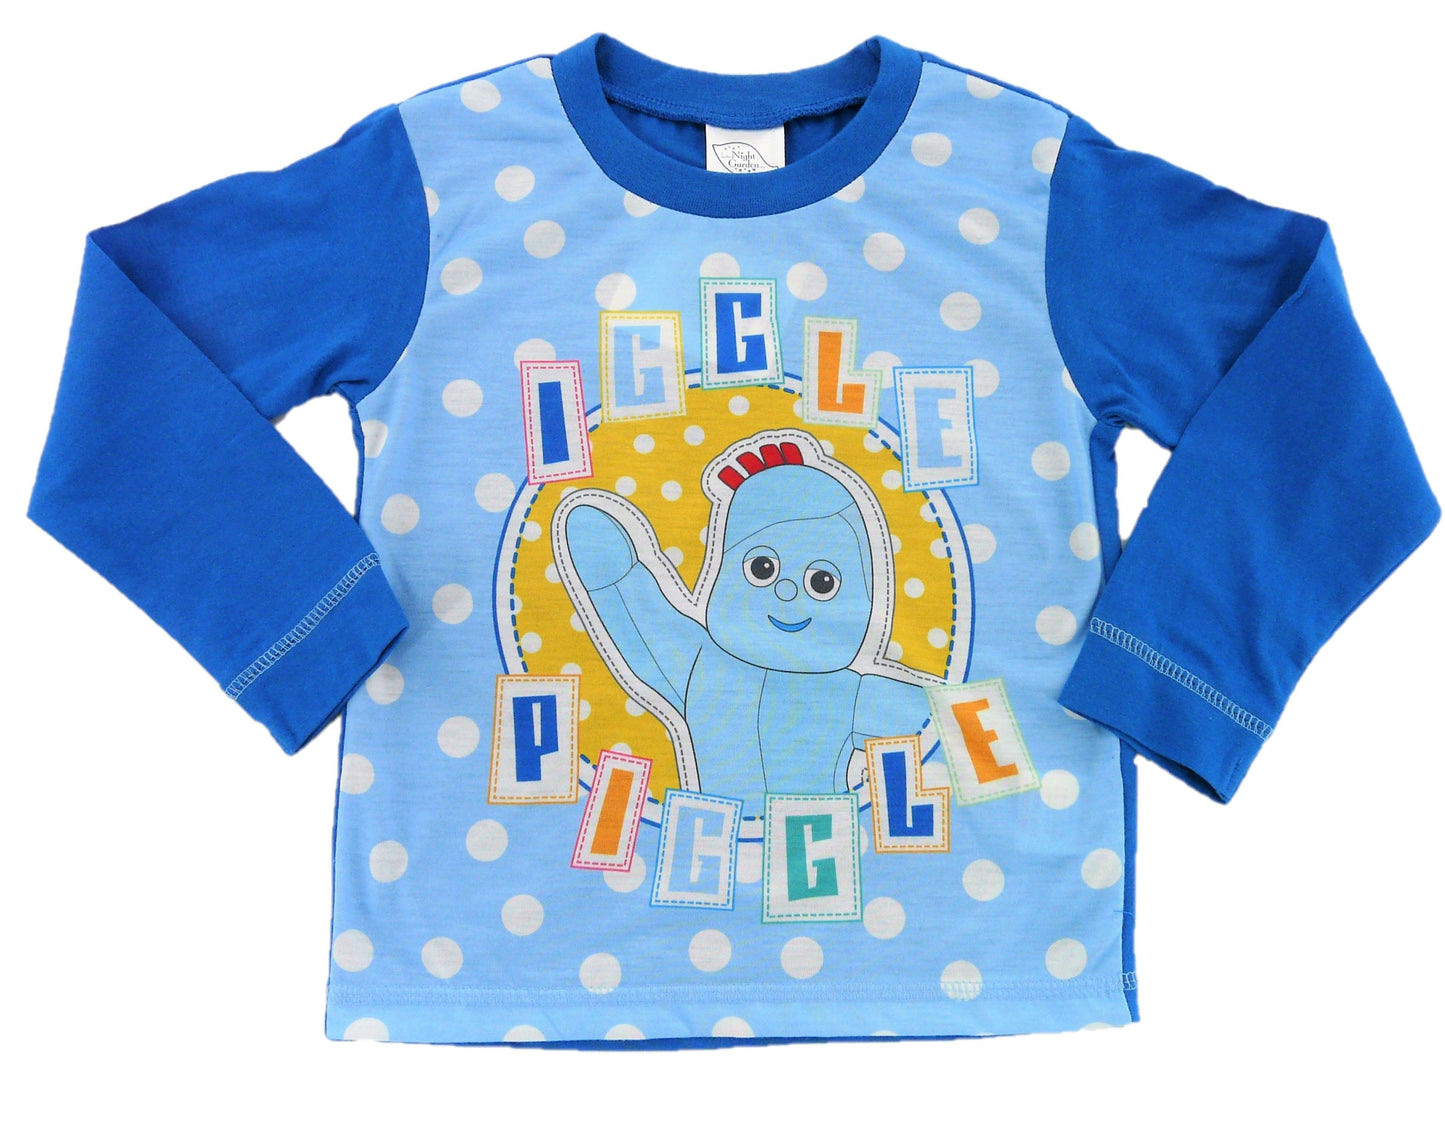 Iggle Piggle Boys Pyjamas In the Night Garden 1 to 5 Years Available